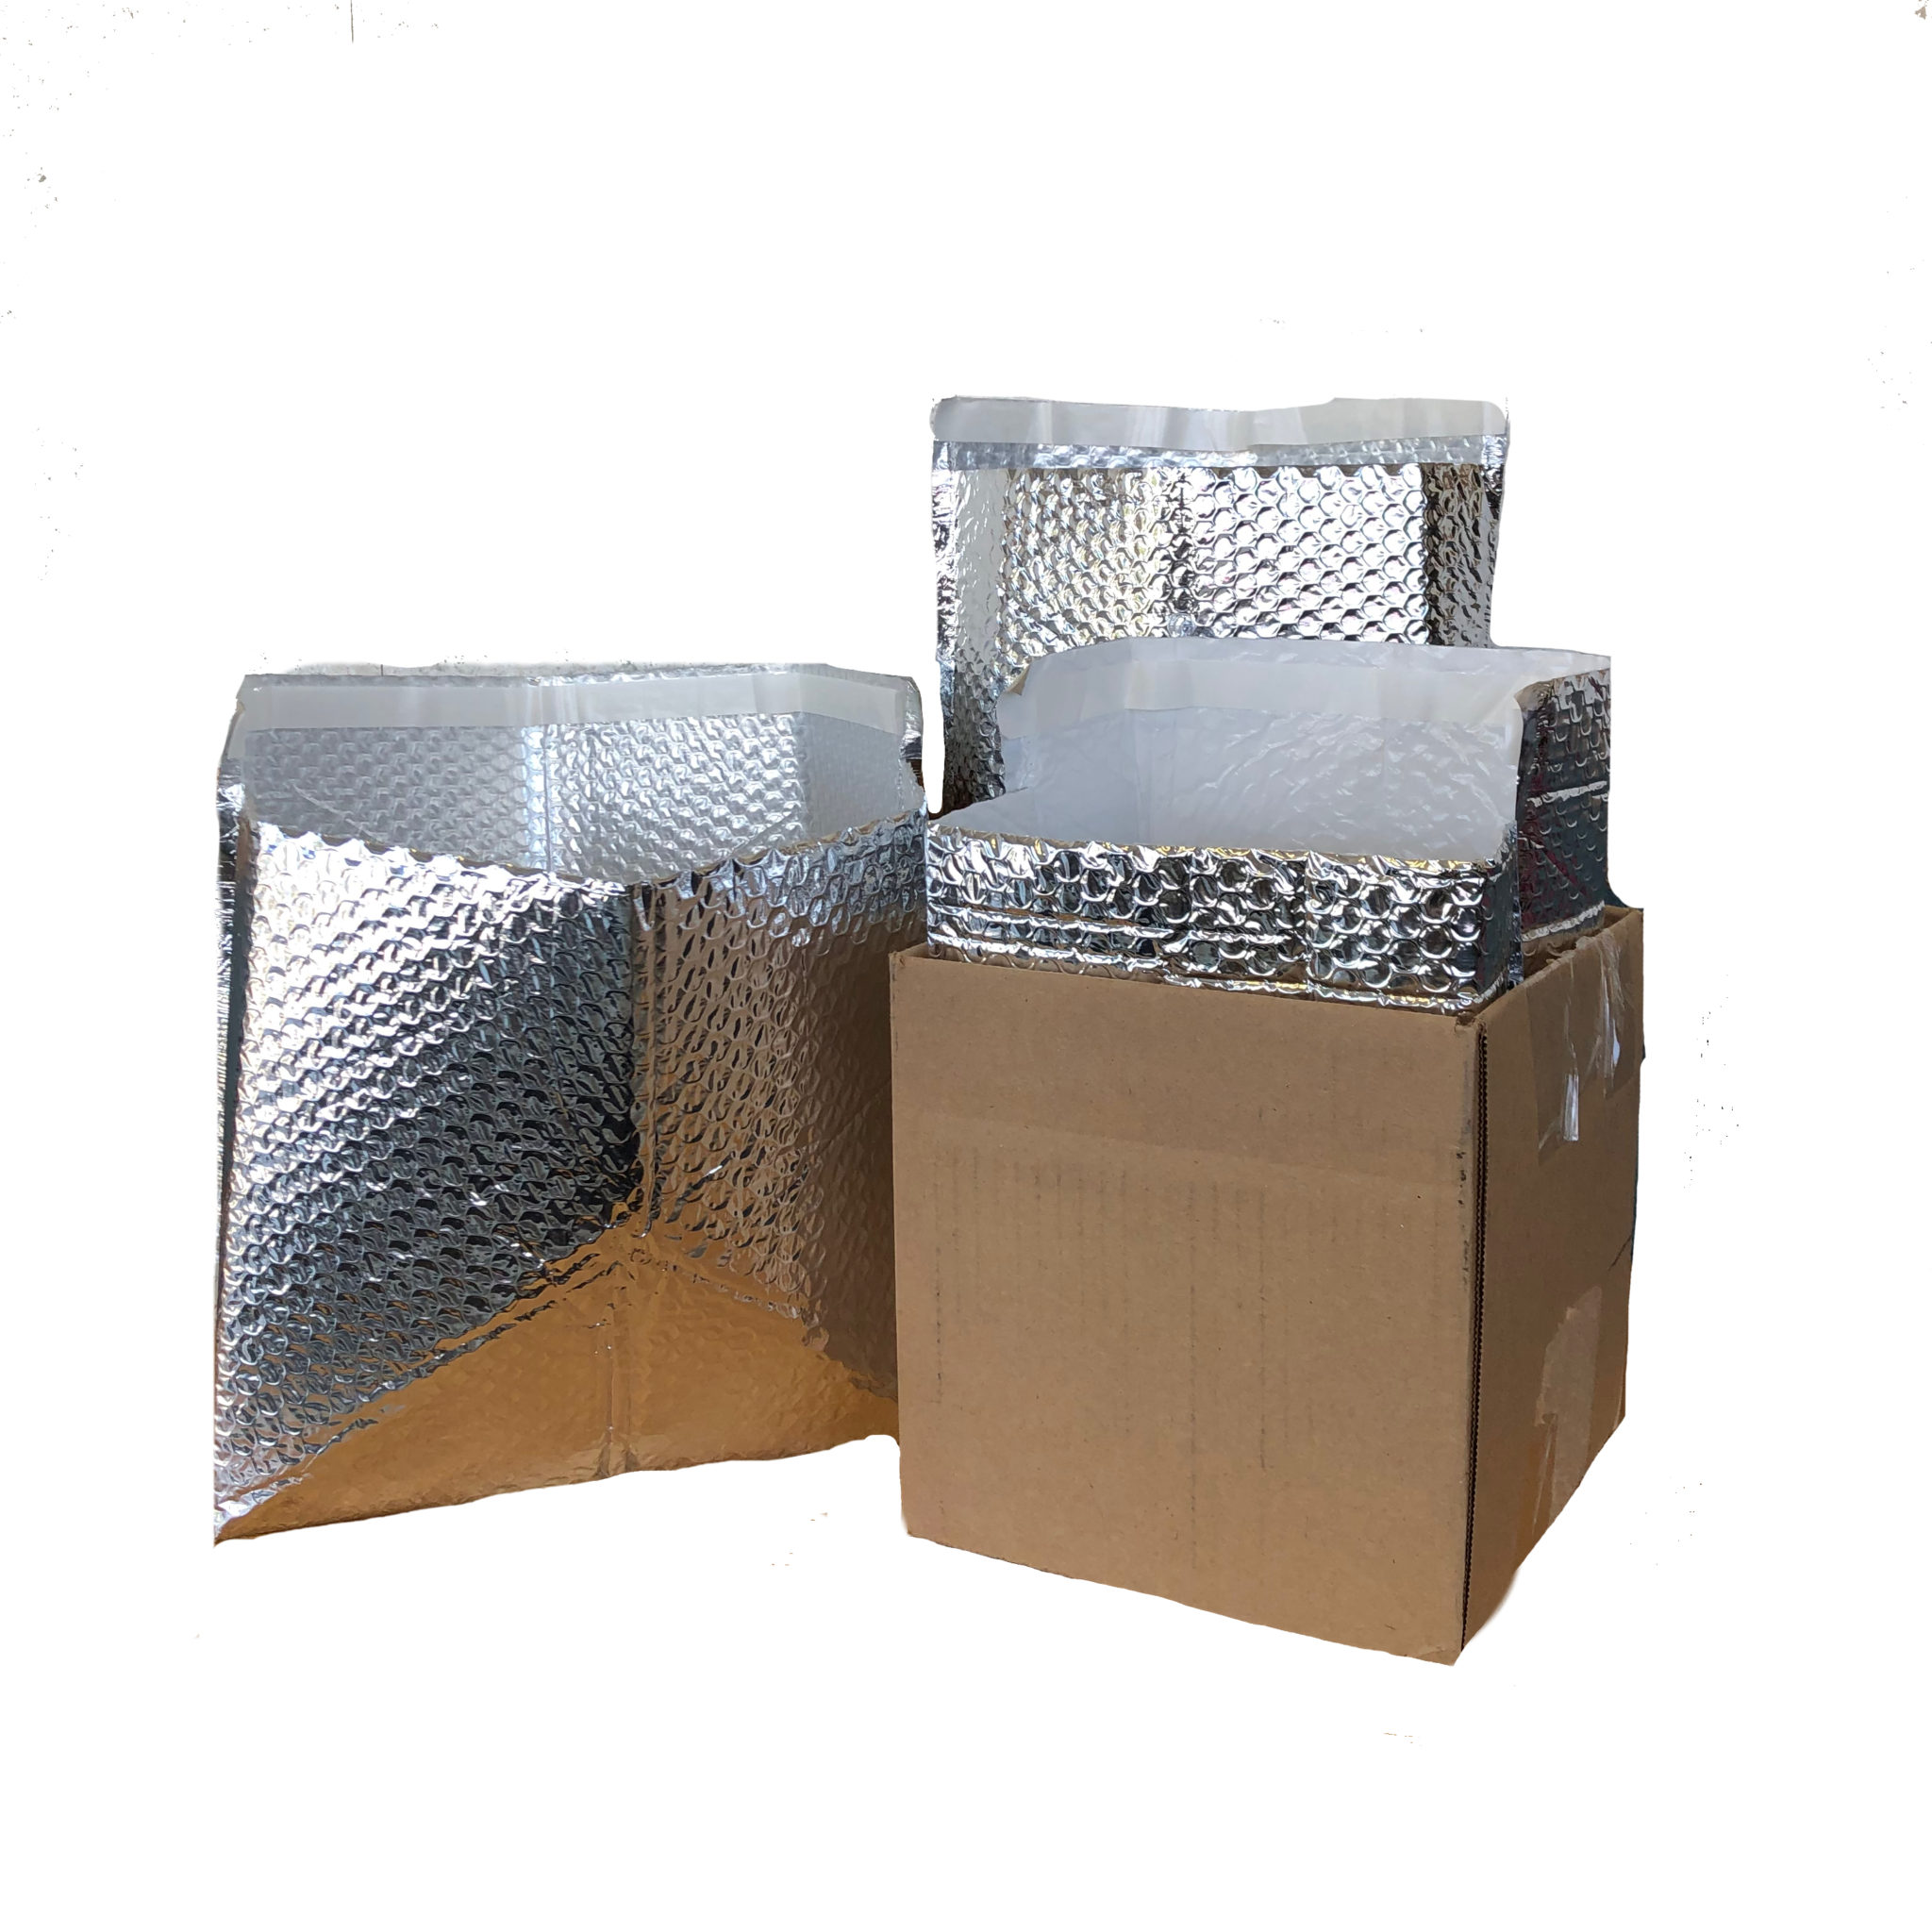 Insulated Boxes for Shipping